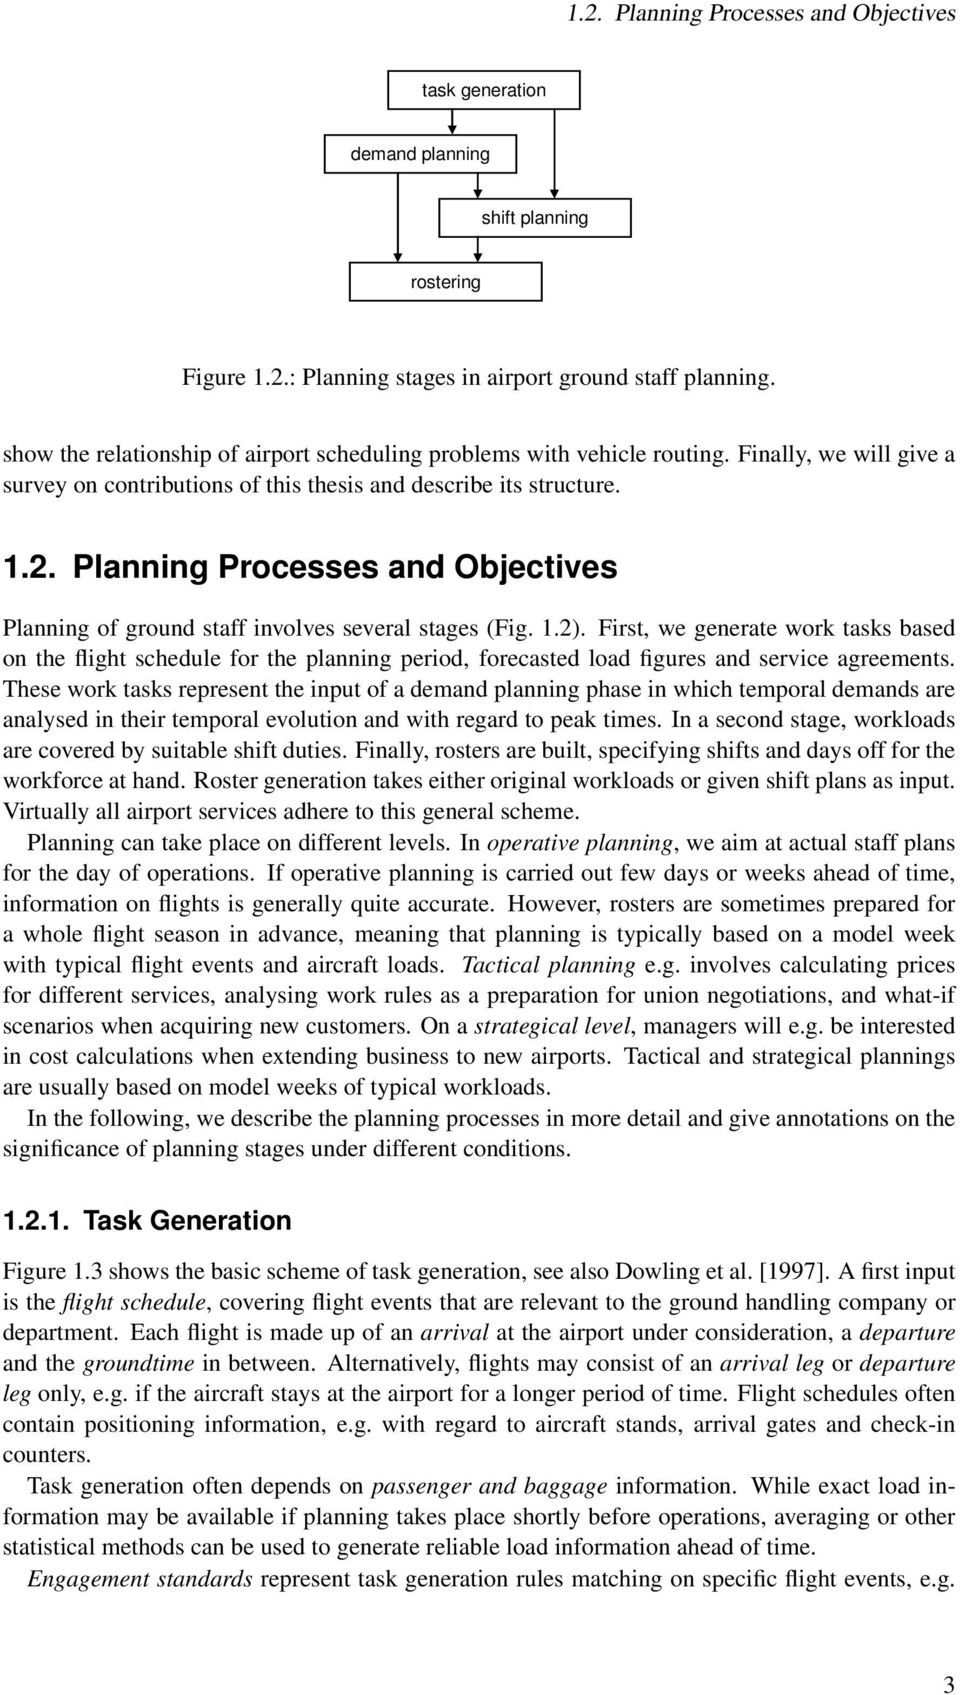 Plannng Processes and Objectves Plannng of ground staff nvolves several stages (Fg. 1.2).